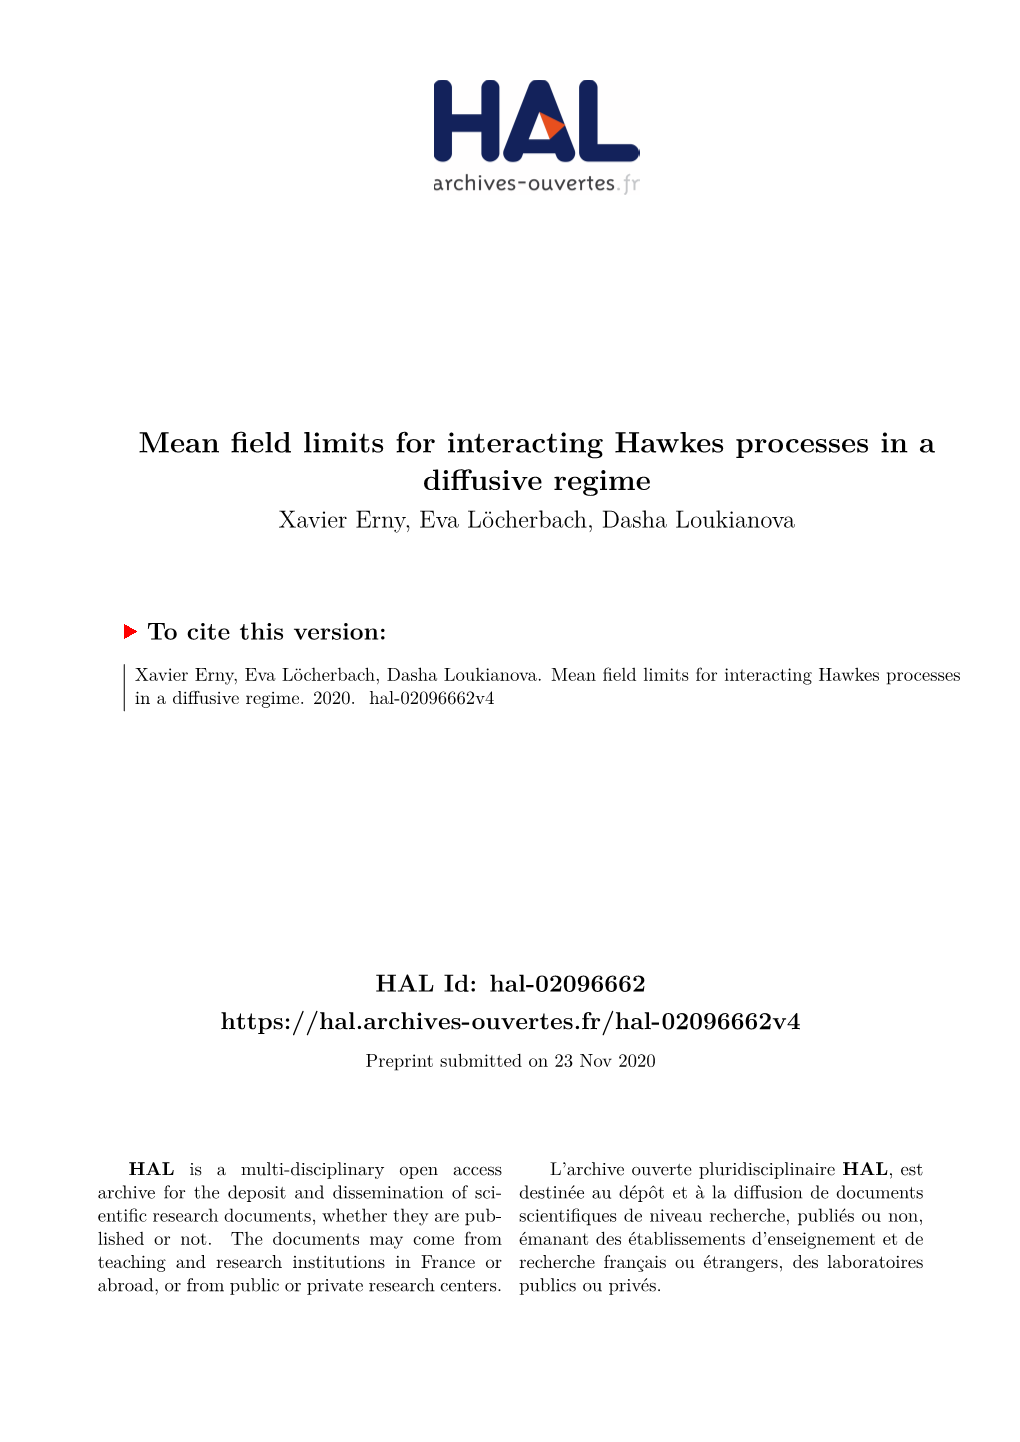 Mean Field Limits for Interacting Hawkes Processes in a Diffusive Regime